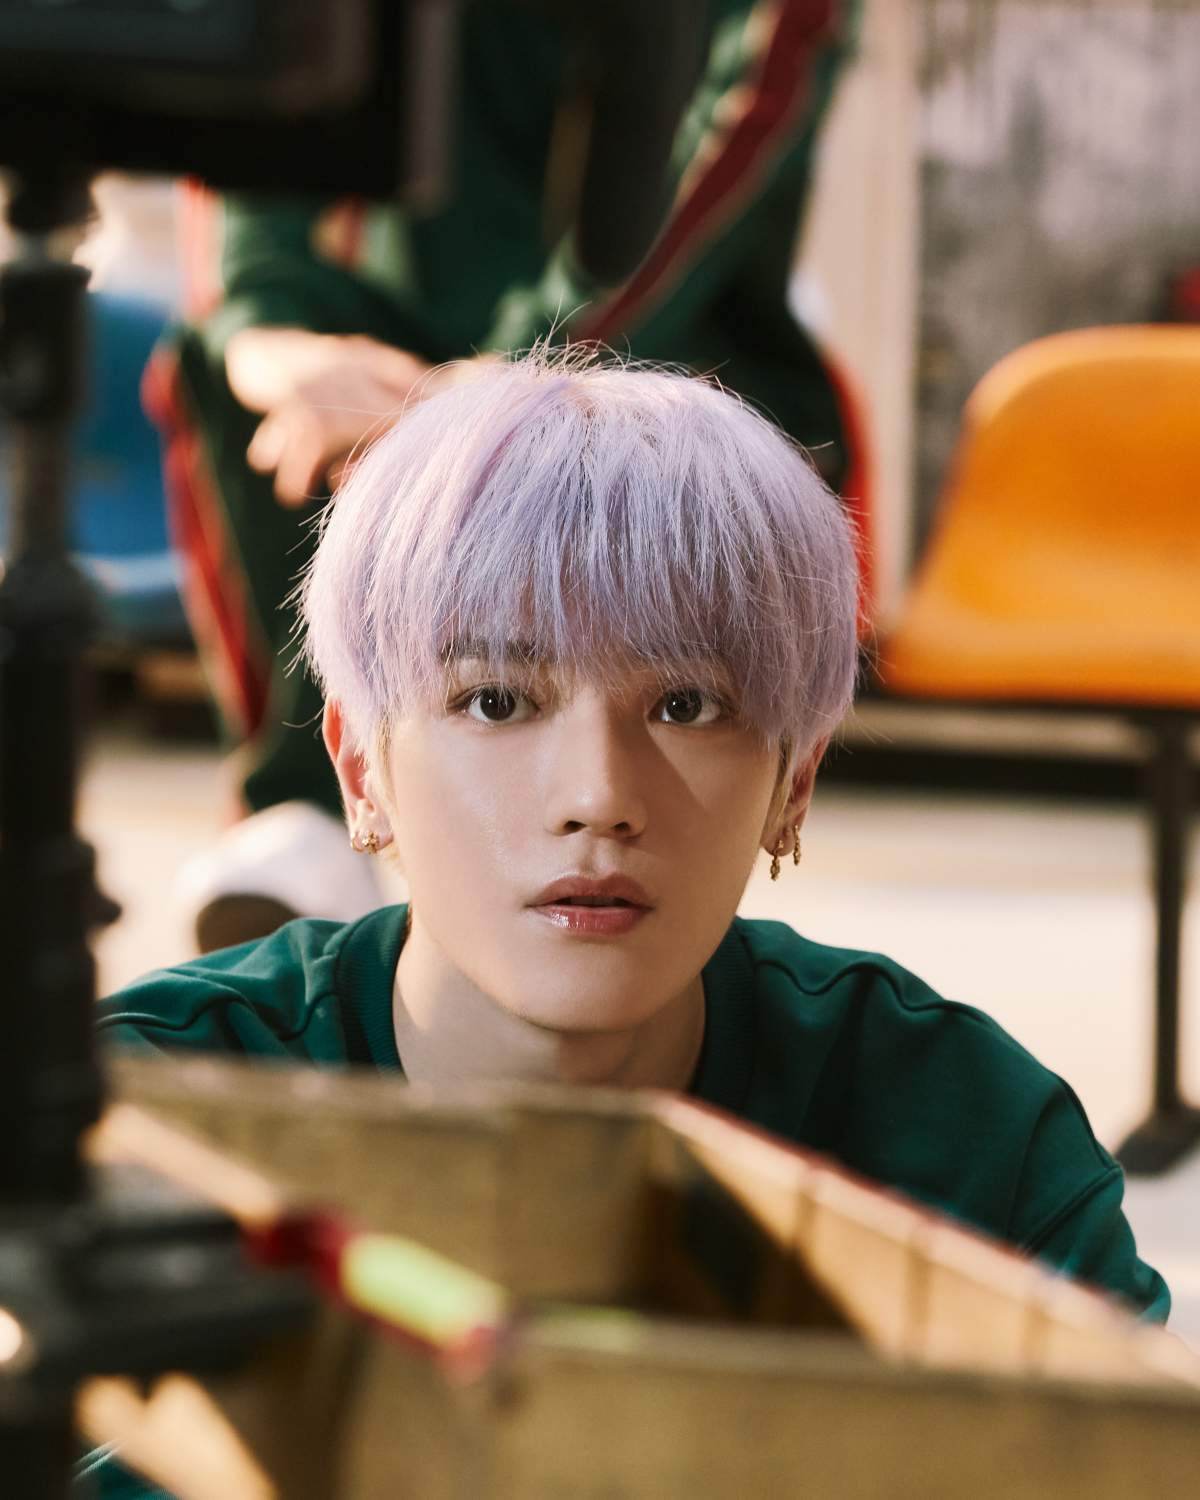 Puma NCT 127 Slipstream Campaign Behind The Scenes